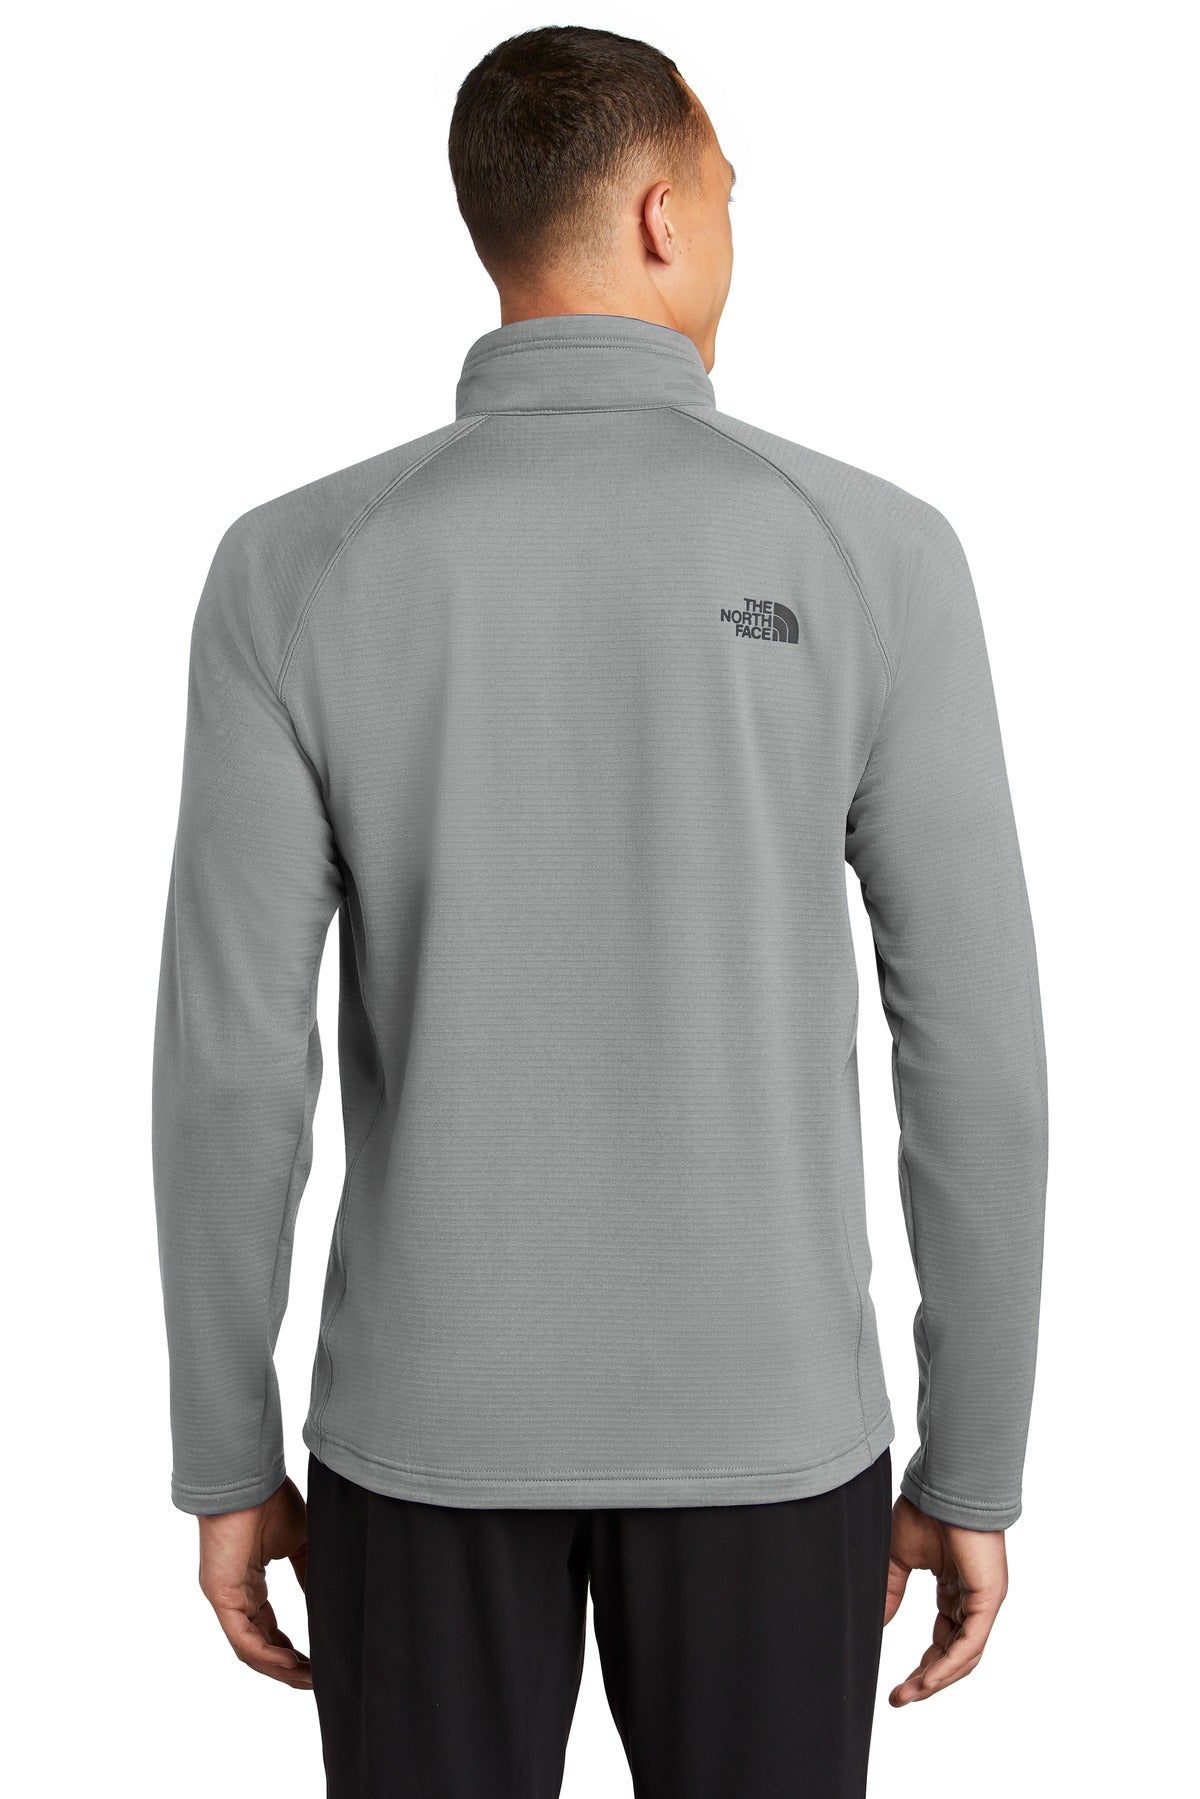 The North Face ® Mountain Peaks 1/4-Zip Fleece NF0A47FB - DFW Impression